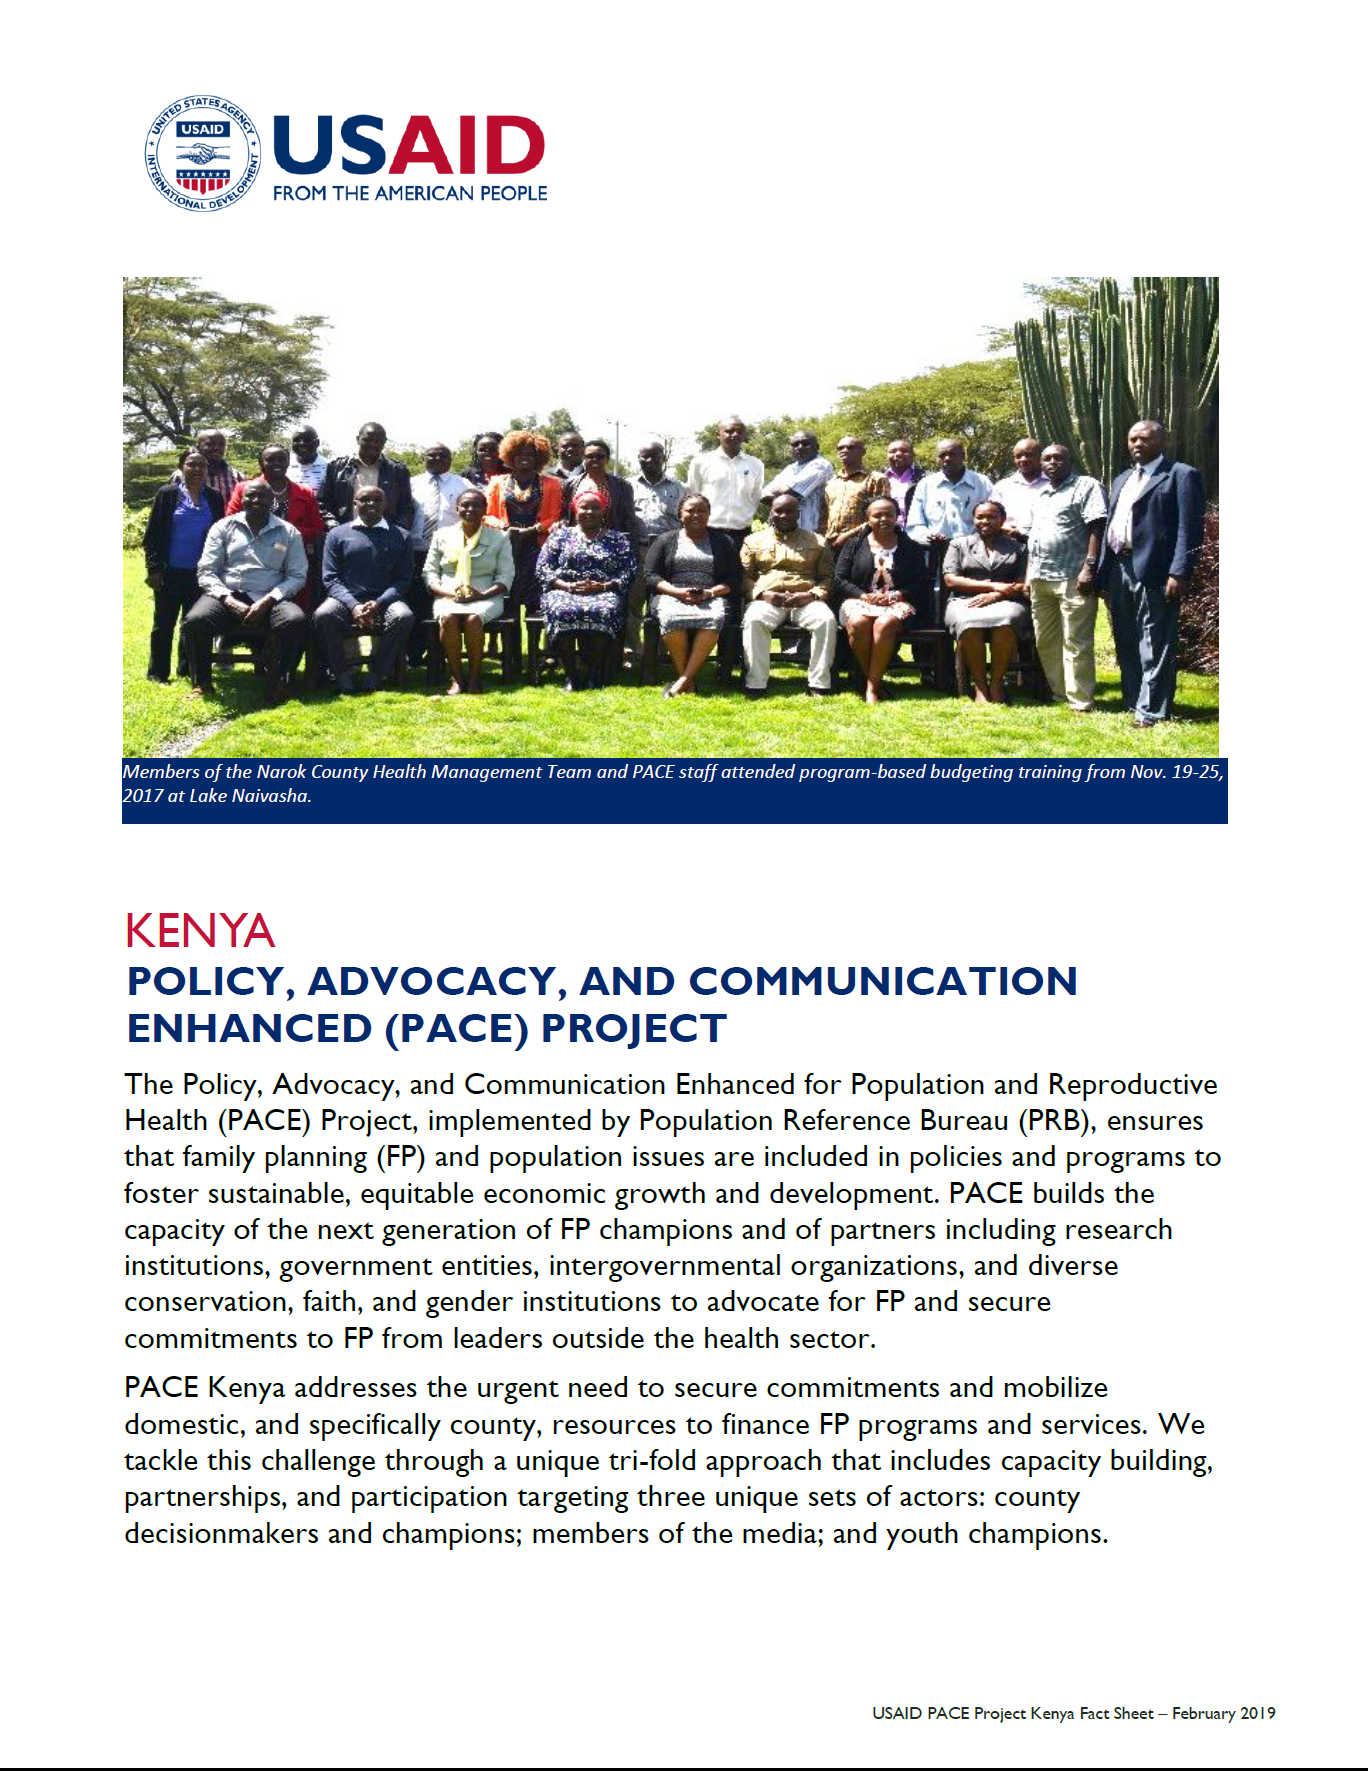 Policy, Advocacy, and Communication Enhanced Project fact sheet